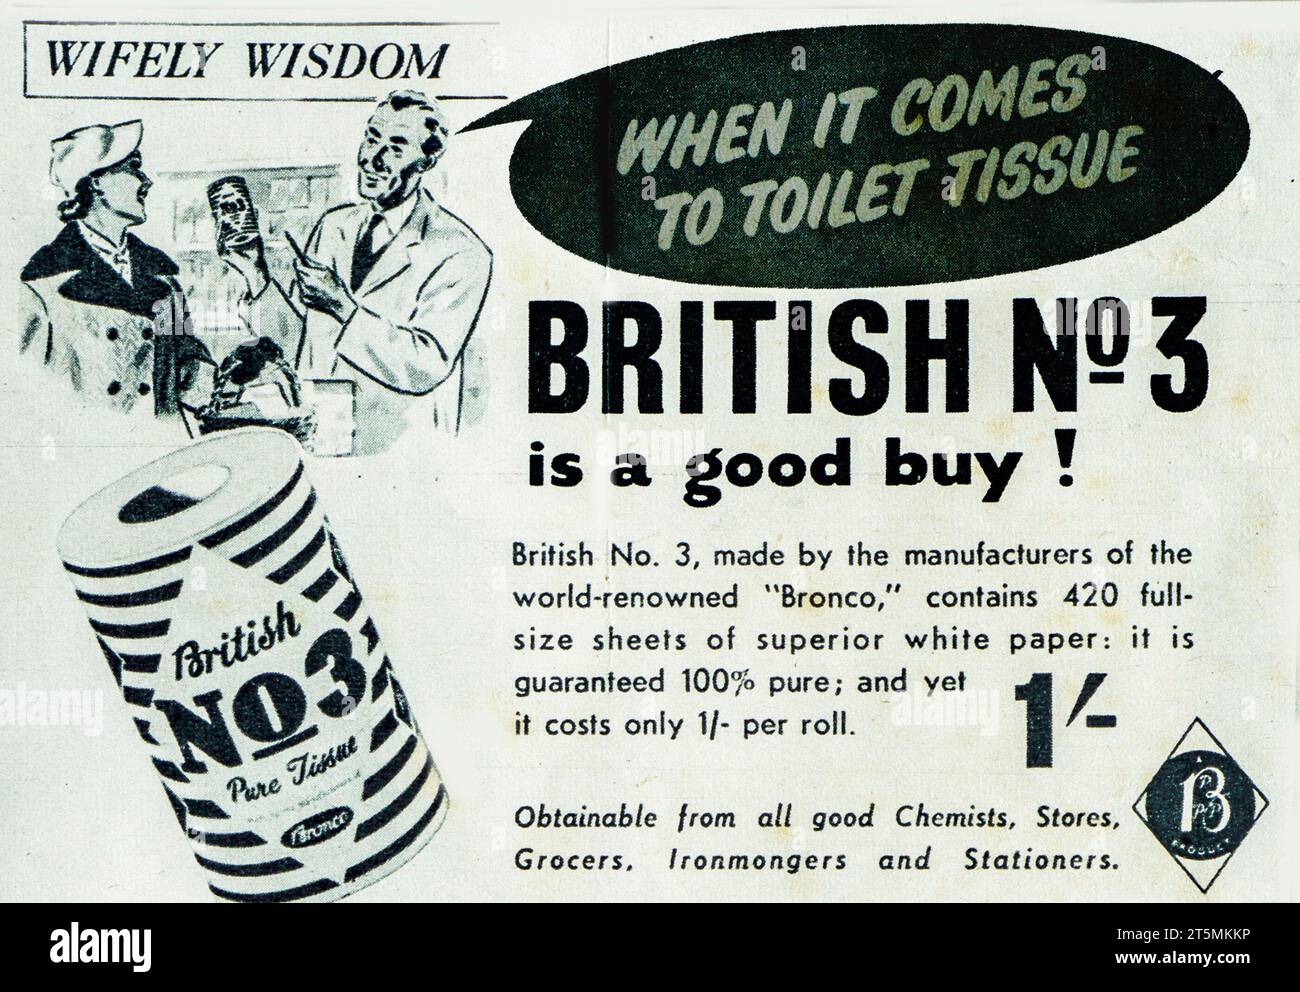 A 1954 advertisement for  British No 3 Toilet Tissue. The advertisement features a woman displaying ‘wifely wisdom’ as she completes her purchase of toilet tissue. Stock Photo